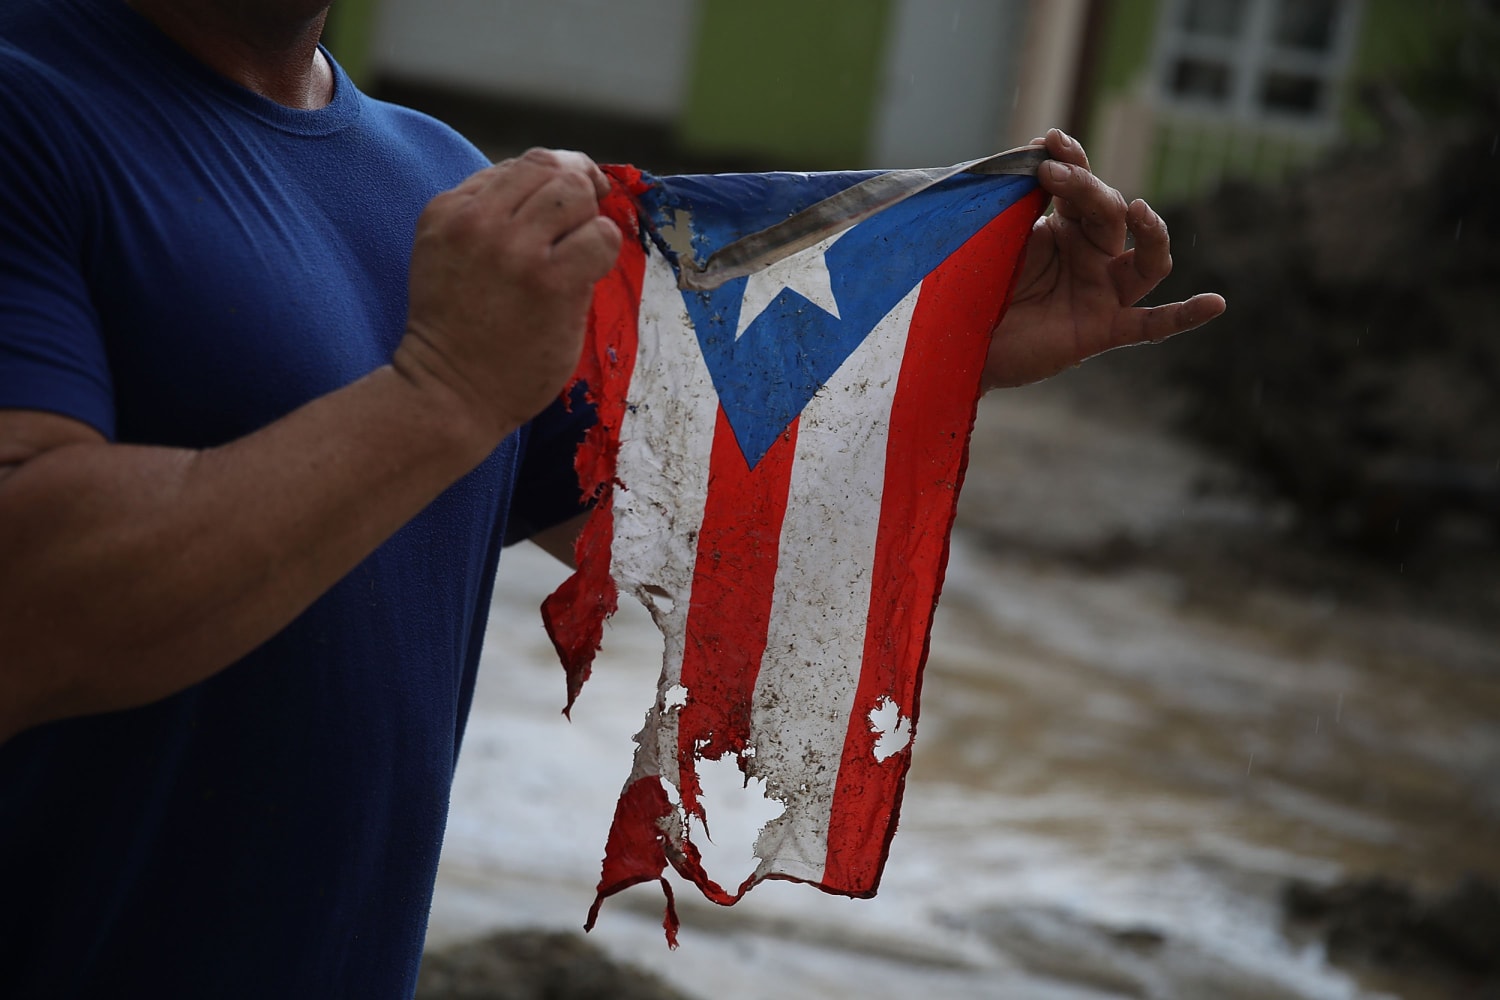 Hurricane Maria caused trauma but fuels purpose among mainland Puerto Ricans, study finds